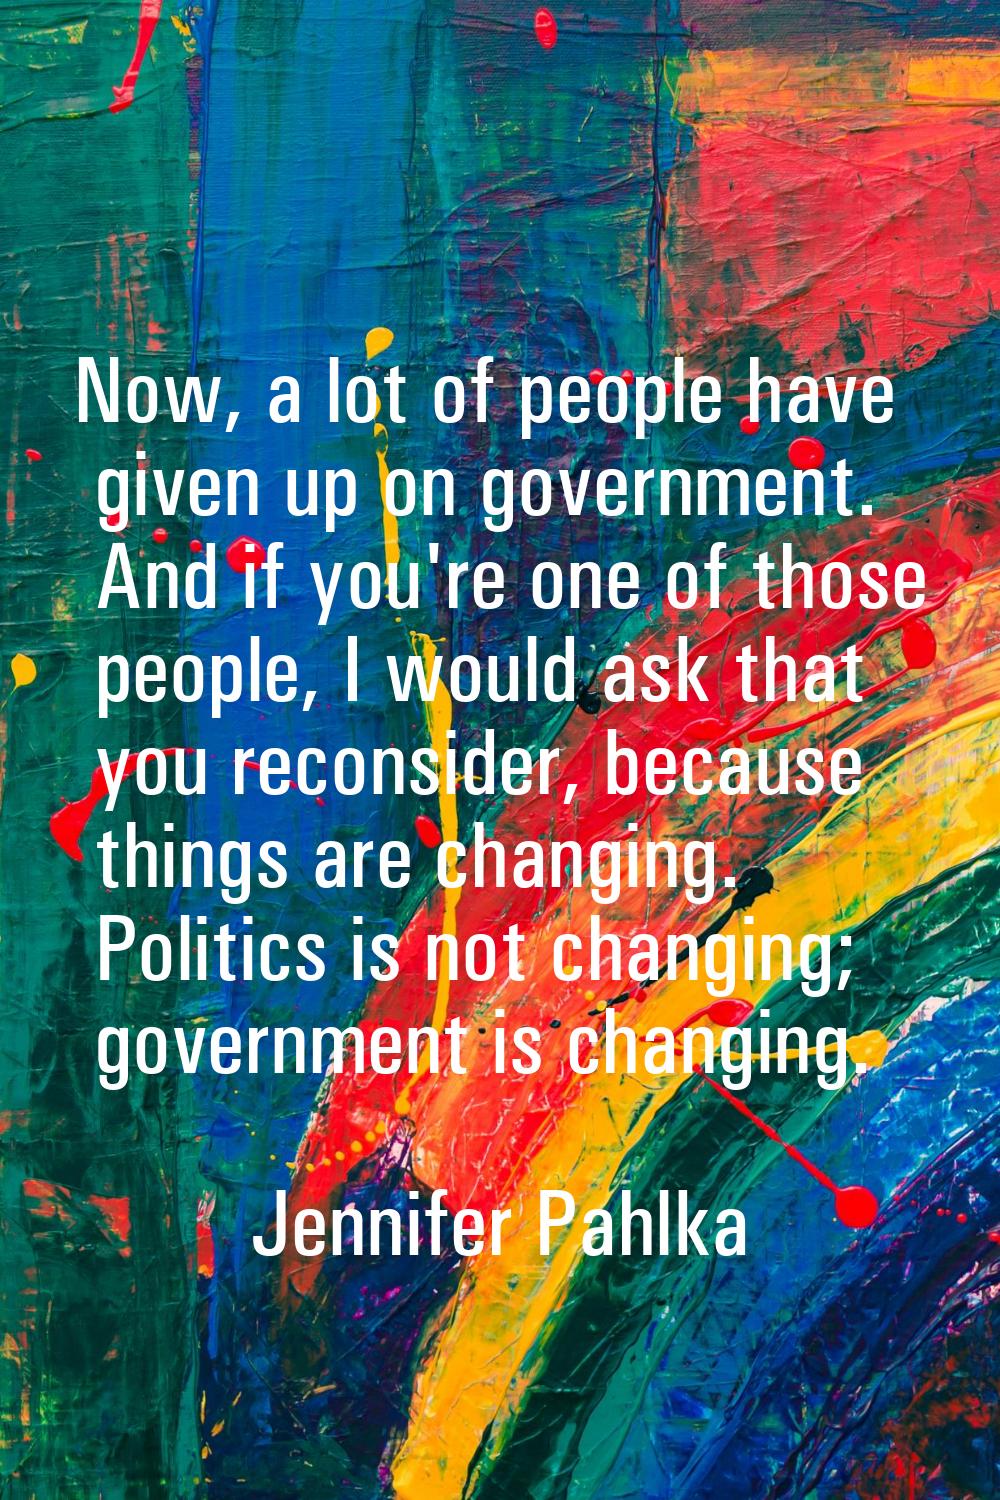 Now, a lot of people have given up on government. And if you're one of those people, I would ask th